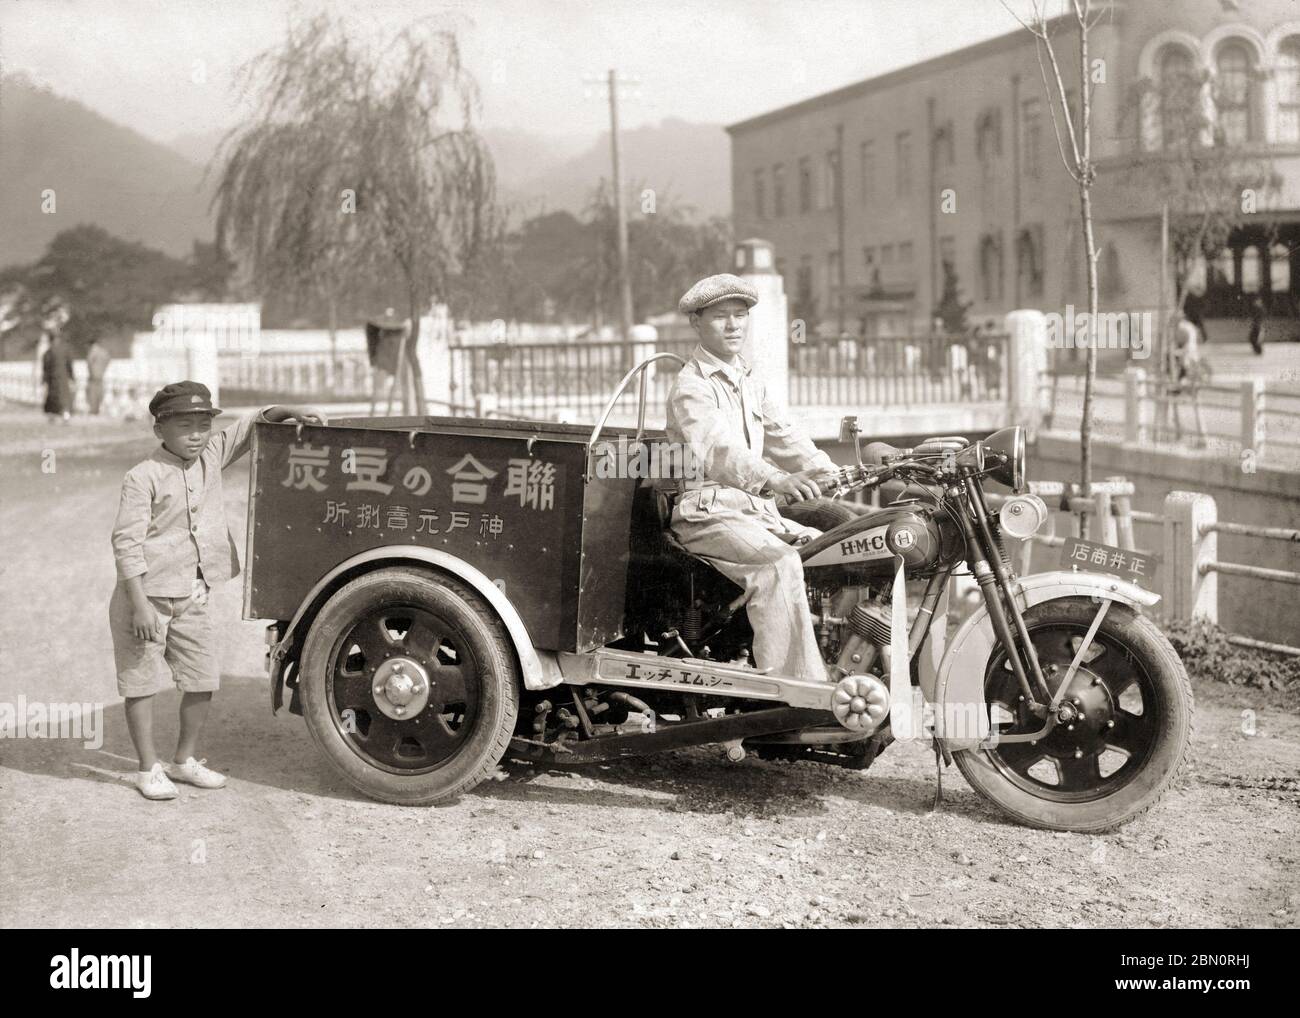 [ 1930 Japan - HMC Rear Car Motorcycle, Kobe ] —   A man selling charcoal briquettes poses on a rear car delivery motorcycle in Kobe.   The motorcycle is a trike manufactured by the Hyogo Motors Company (HMC, 兵庫モータース). No driver's license was needed for trikes below 750cc, making them extremely popular in Japan.  The photo is dated May 12, 1930.  Very few Japanese cargo trikes survived the war, making this photo an important historical document.  20th century gelatin silver print. Stock Photo